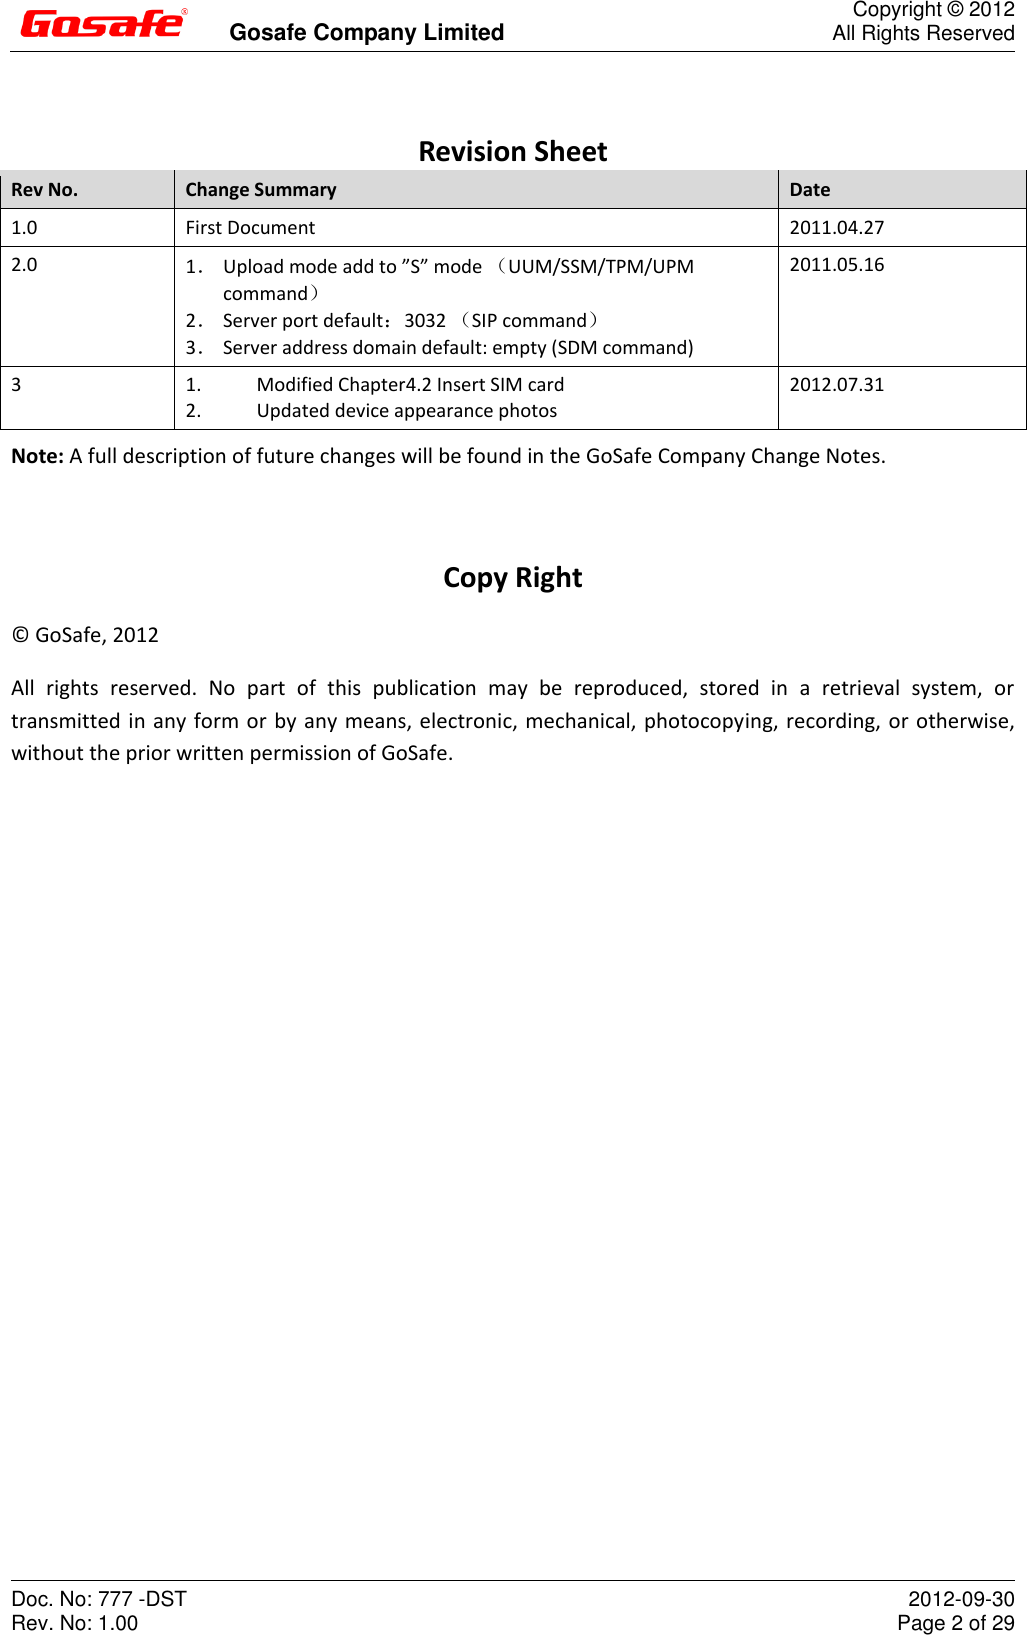         Gosafe Company Limited  Copyright © 2012 All Rights Reserved Doc. No: 777 -DST Rev. No: 1.00  2012-09-30 Page 2 of 29  Revision Sheet Rev No. Change Summary Date 1.0 First Document 2011.04.27 2.0 1． Upload mode add to ”S” mode （UUM/SSM/TPM/UPM command） 2． Server port default：3032 （SIP command） 3． Server address domain default: empty (SDM command) 2011.05.16 3 1.  Modified Chapter4.2 Insert SIM card 2.  Updated device appearance photos 2012.07.31 Note: A full description of future changes will be found in the GoSafe Company Change Notes.  Copy Right ©  GoSafe, 2012 All  rights  reserved.  No  part  of  this  publication  may  be  reproduced,  stored  in  a  retrieval  system,  or transmitted in any form or by any means, electronic, mechanical, photocopying, recording, or otherwise, without the prior written permission of GoSafe.   